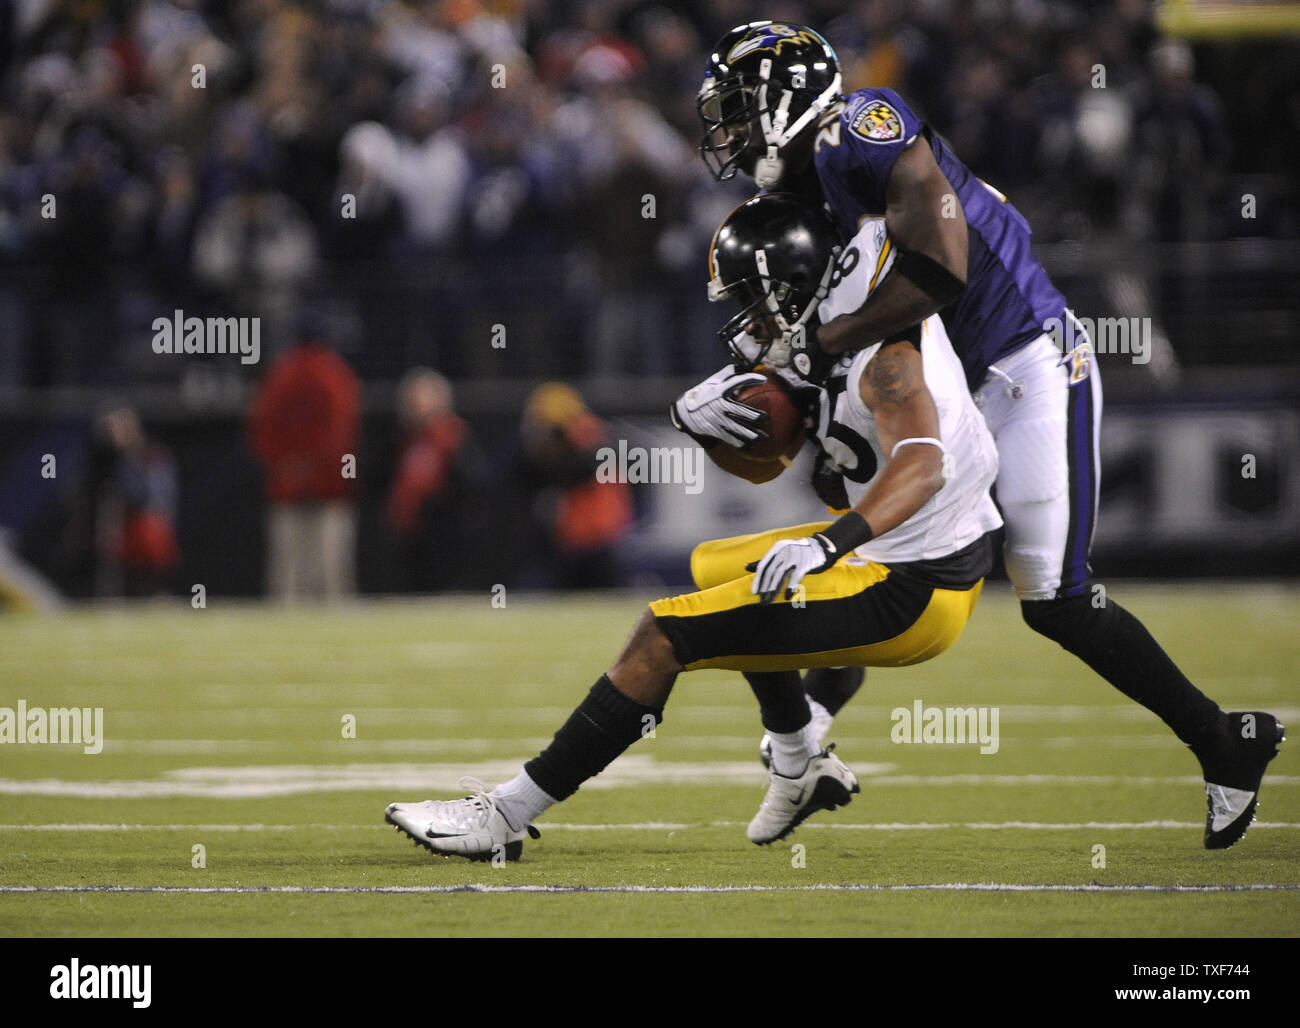 Pittsburgh Steelers wide receiver Hines Ward (86) is stopped by Baltimore Ravens safety Ed Reed after a 10 yard gain in the fourth quarter at M & T Bank Stadium in Baltimore, Maryland on December 14, 2008. The Steelers defeated the Ravens 13-9.  (UPI Photo/Kevin Dietsch) Stock Photo